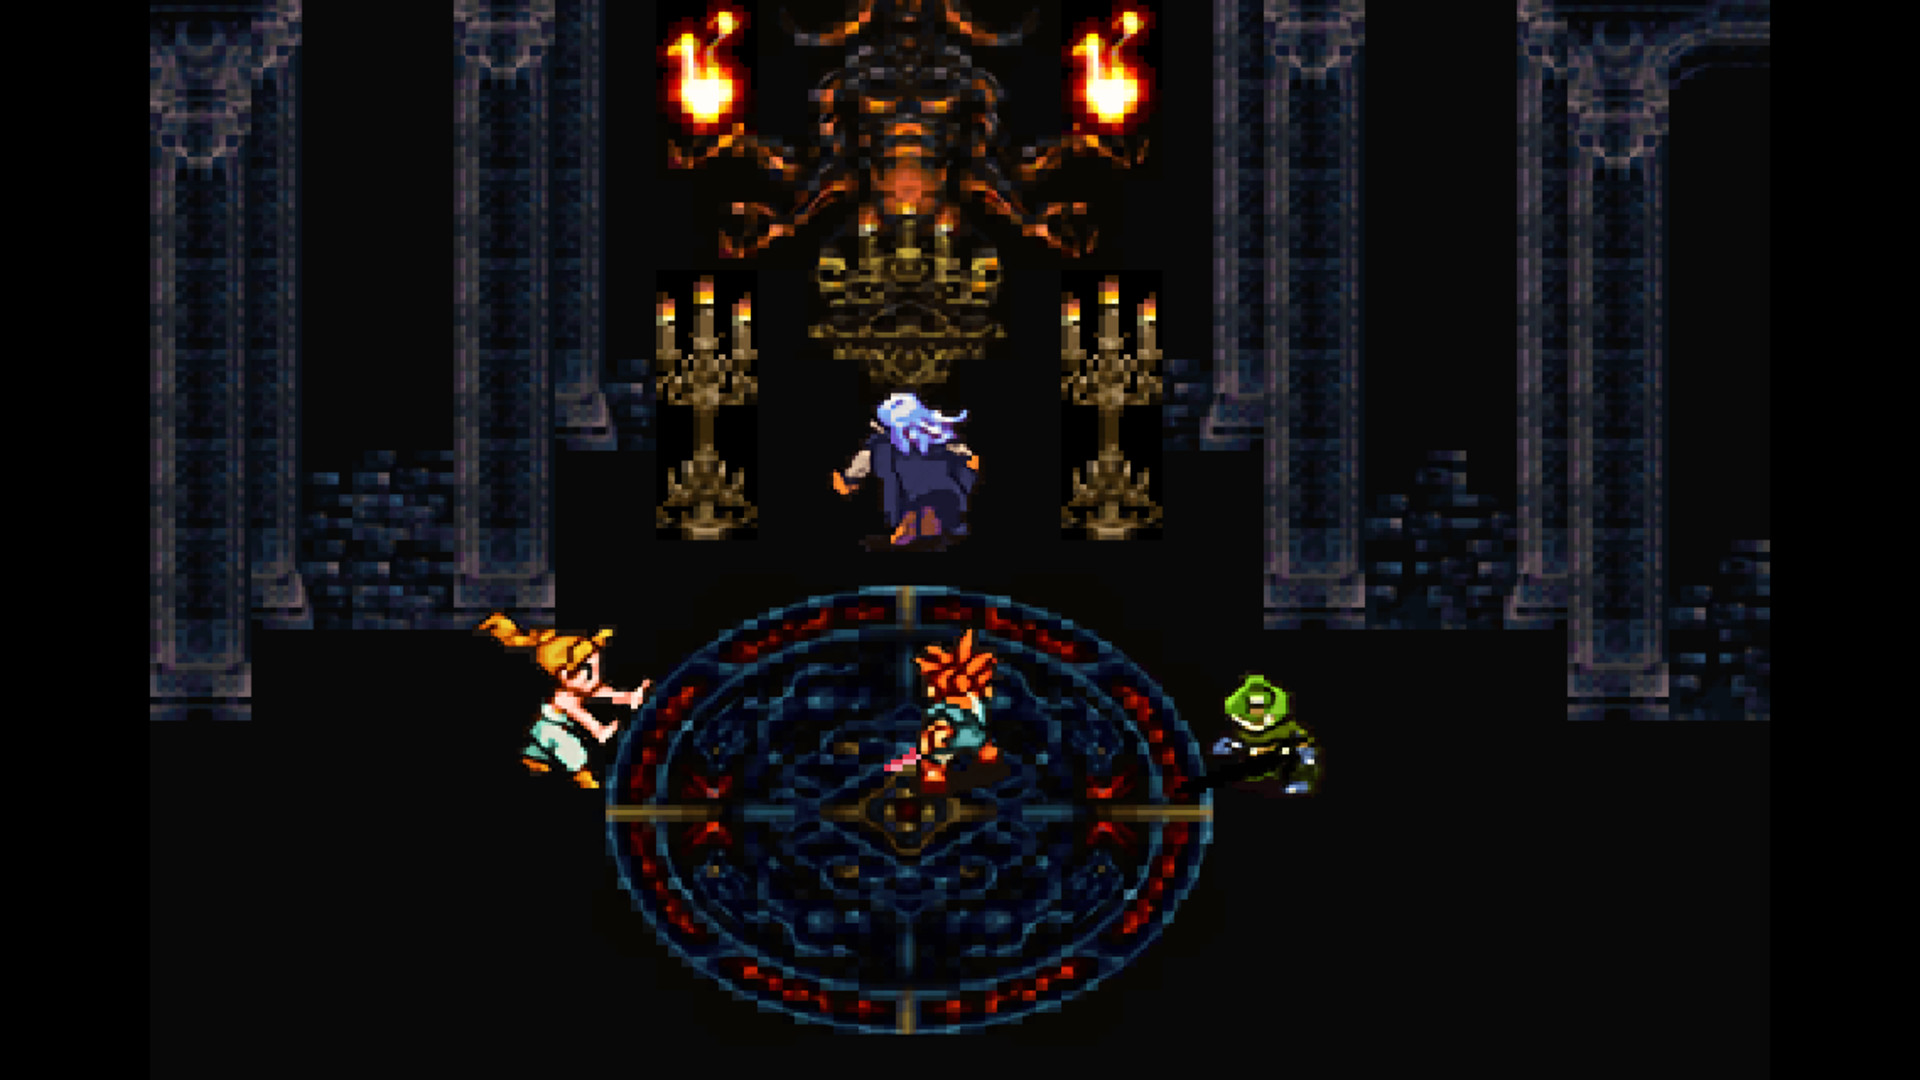 download chrono trigger on steam